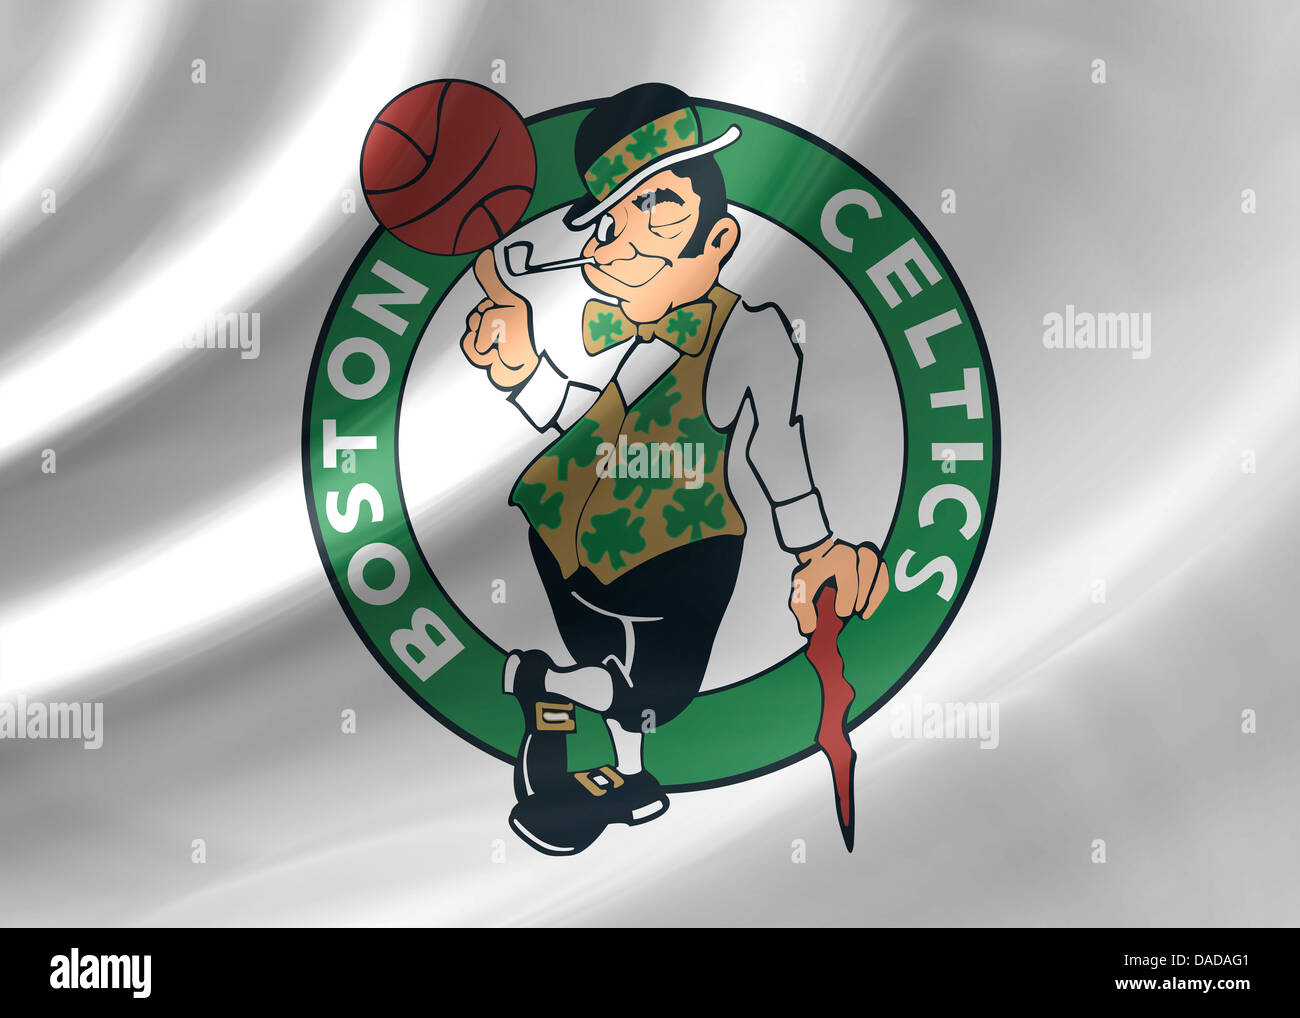 Celtics Logo Icon High Resolution Stock Photography And Images Alamy https www alamy com stock photo boston celtics logo symbol icon flag emblem 58071329 html